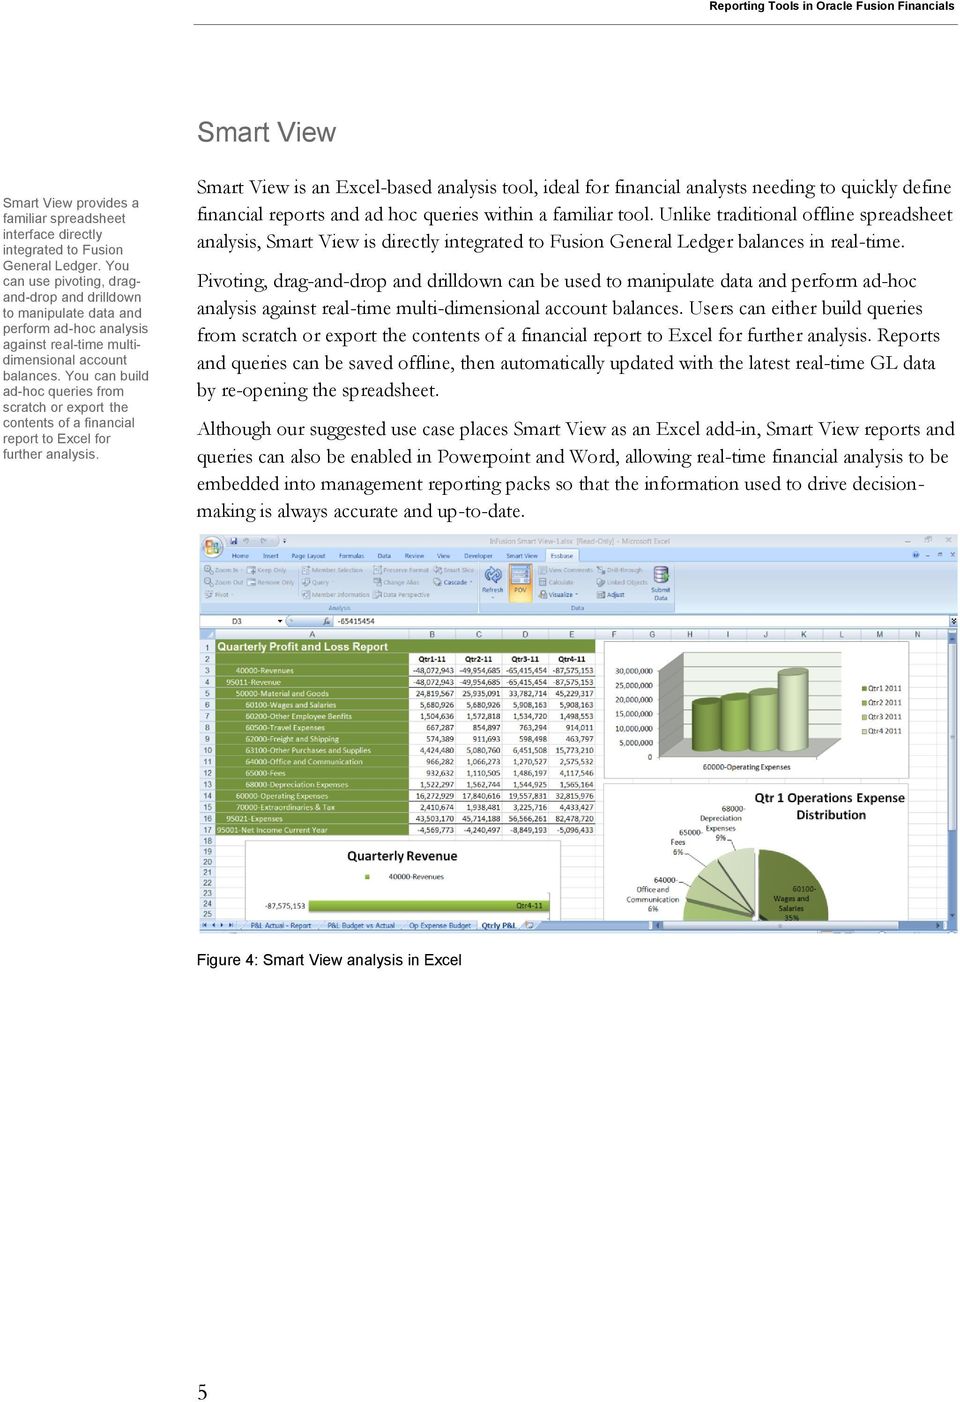 You can build ad-hoc queries from scratch or export the contents of a financial report to Excel for further analysis.